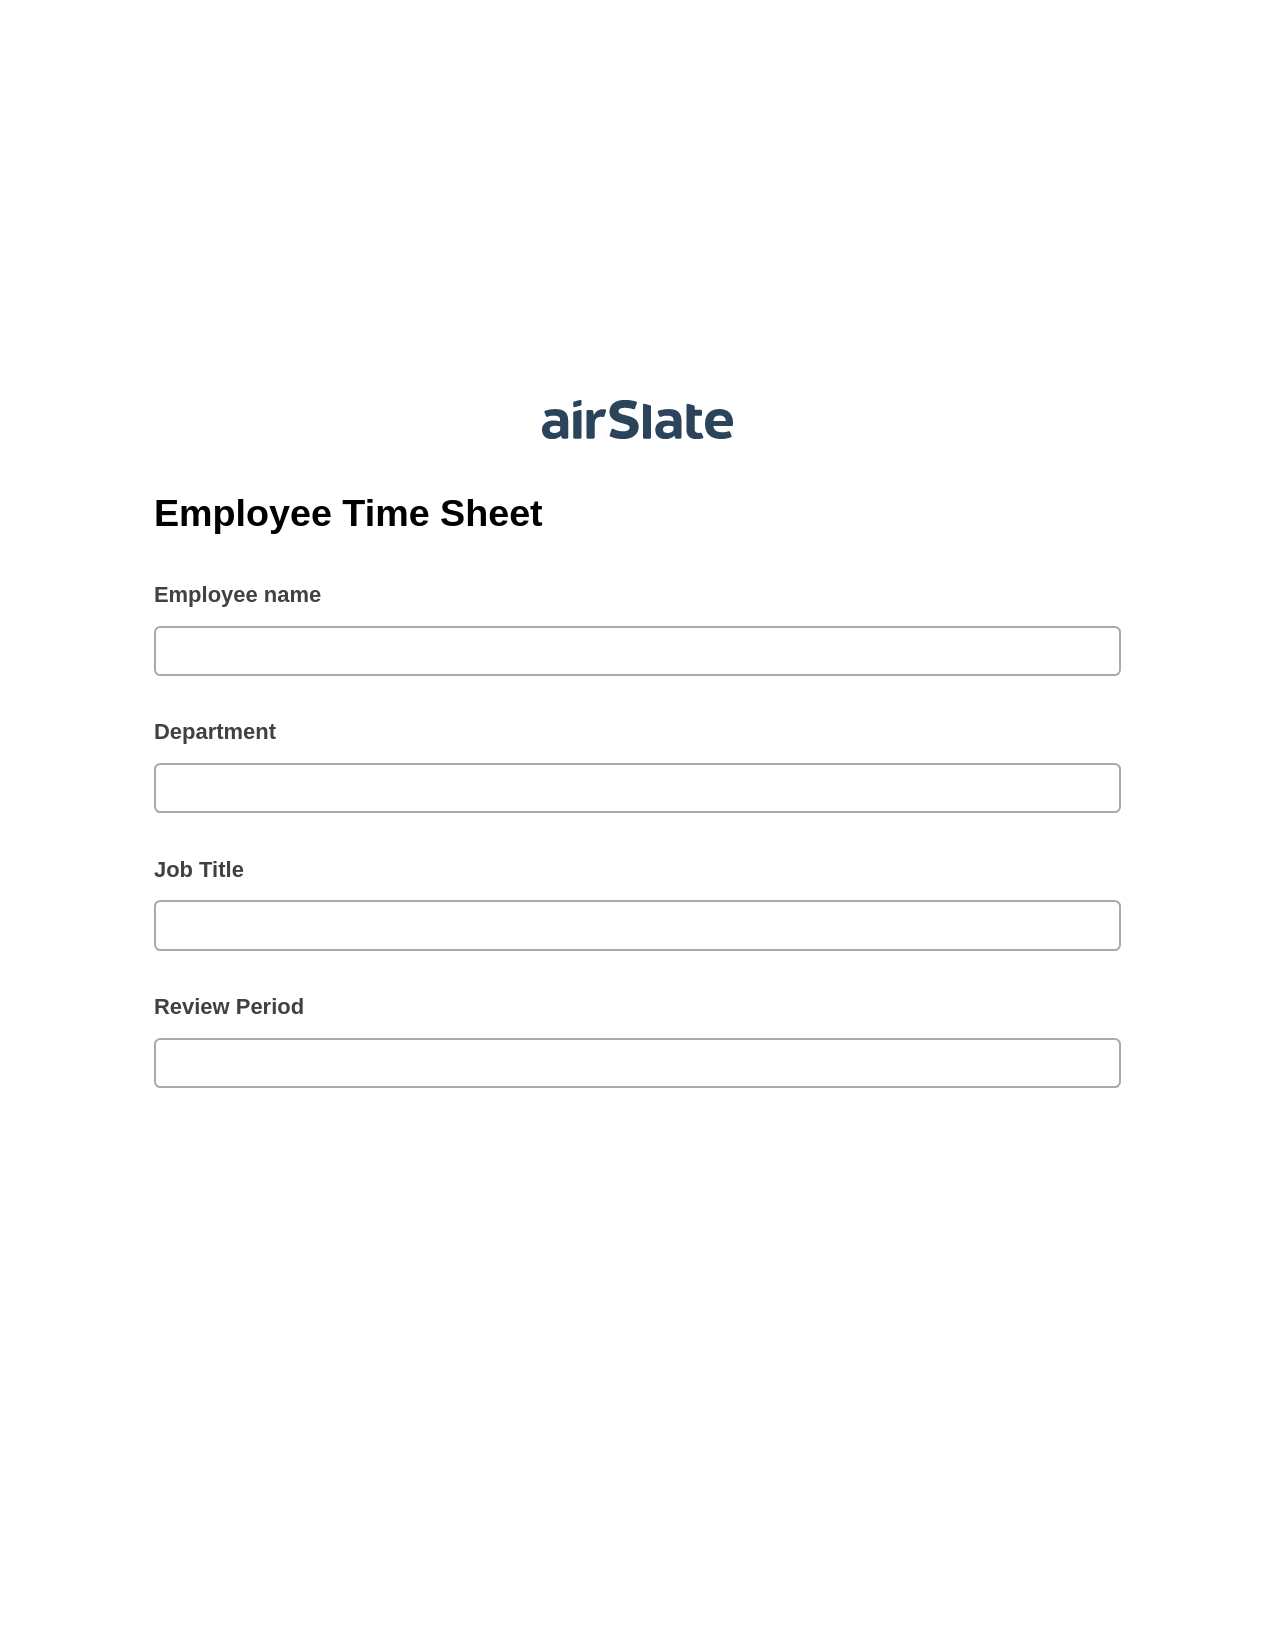 Employee Time Sheet Pre-fill from Salesforce Records Bot, Slack Notification Bot, Export to Excel 365 Bot